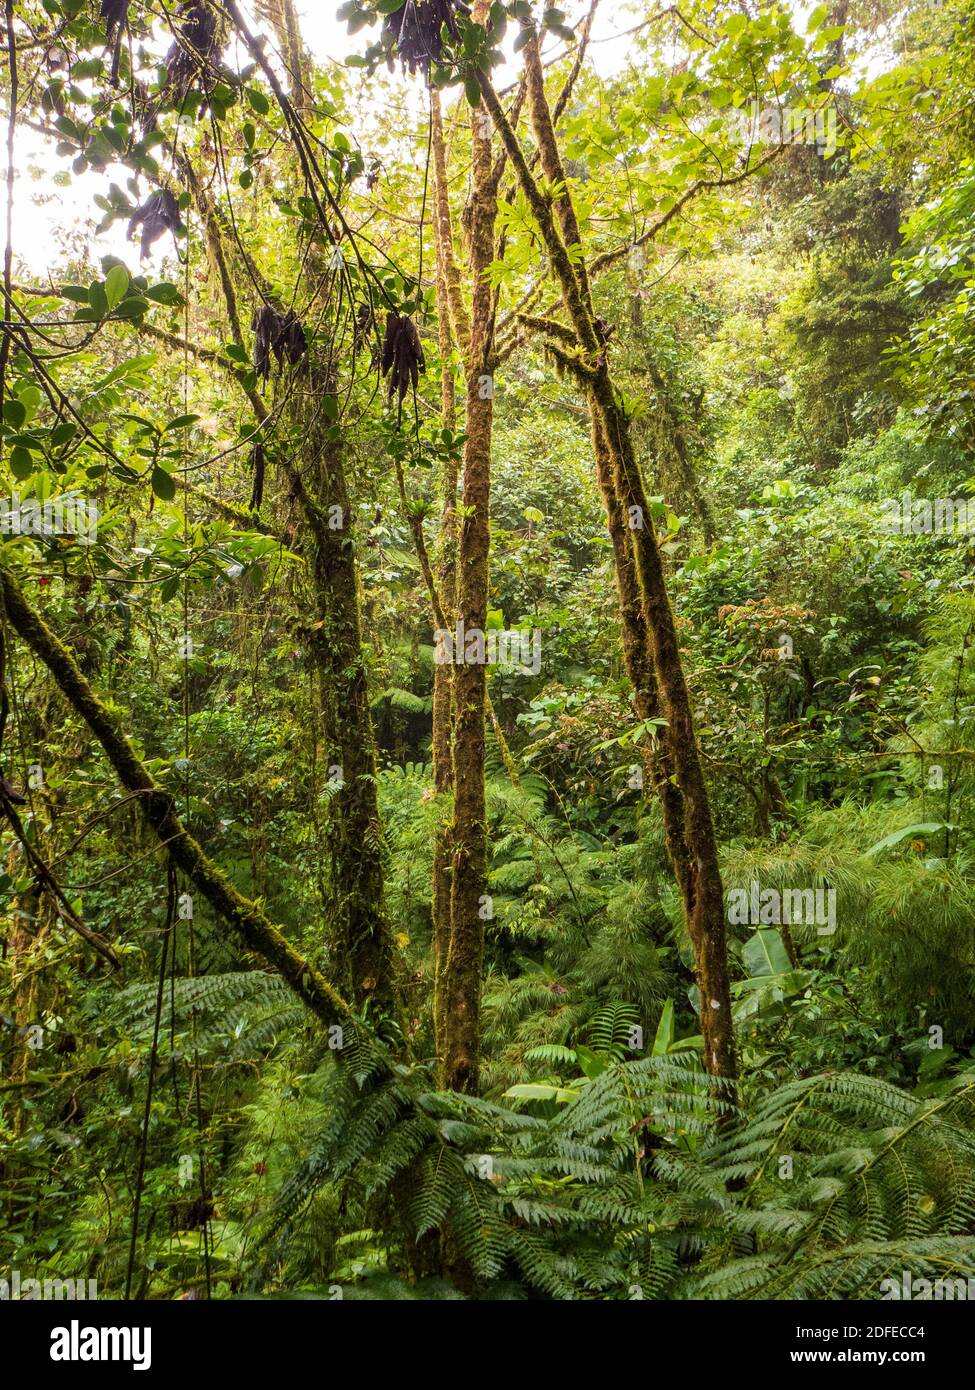 Hike through the rainforest in Costa Rica. The trees strive against the light and have grown very tall. Epiphytes overgrow every tree. Stock Photo